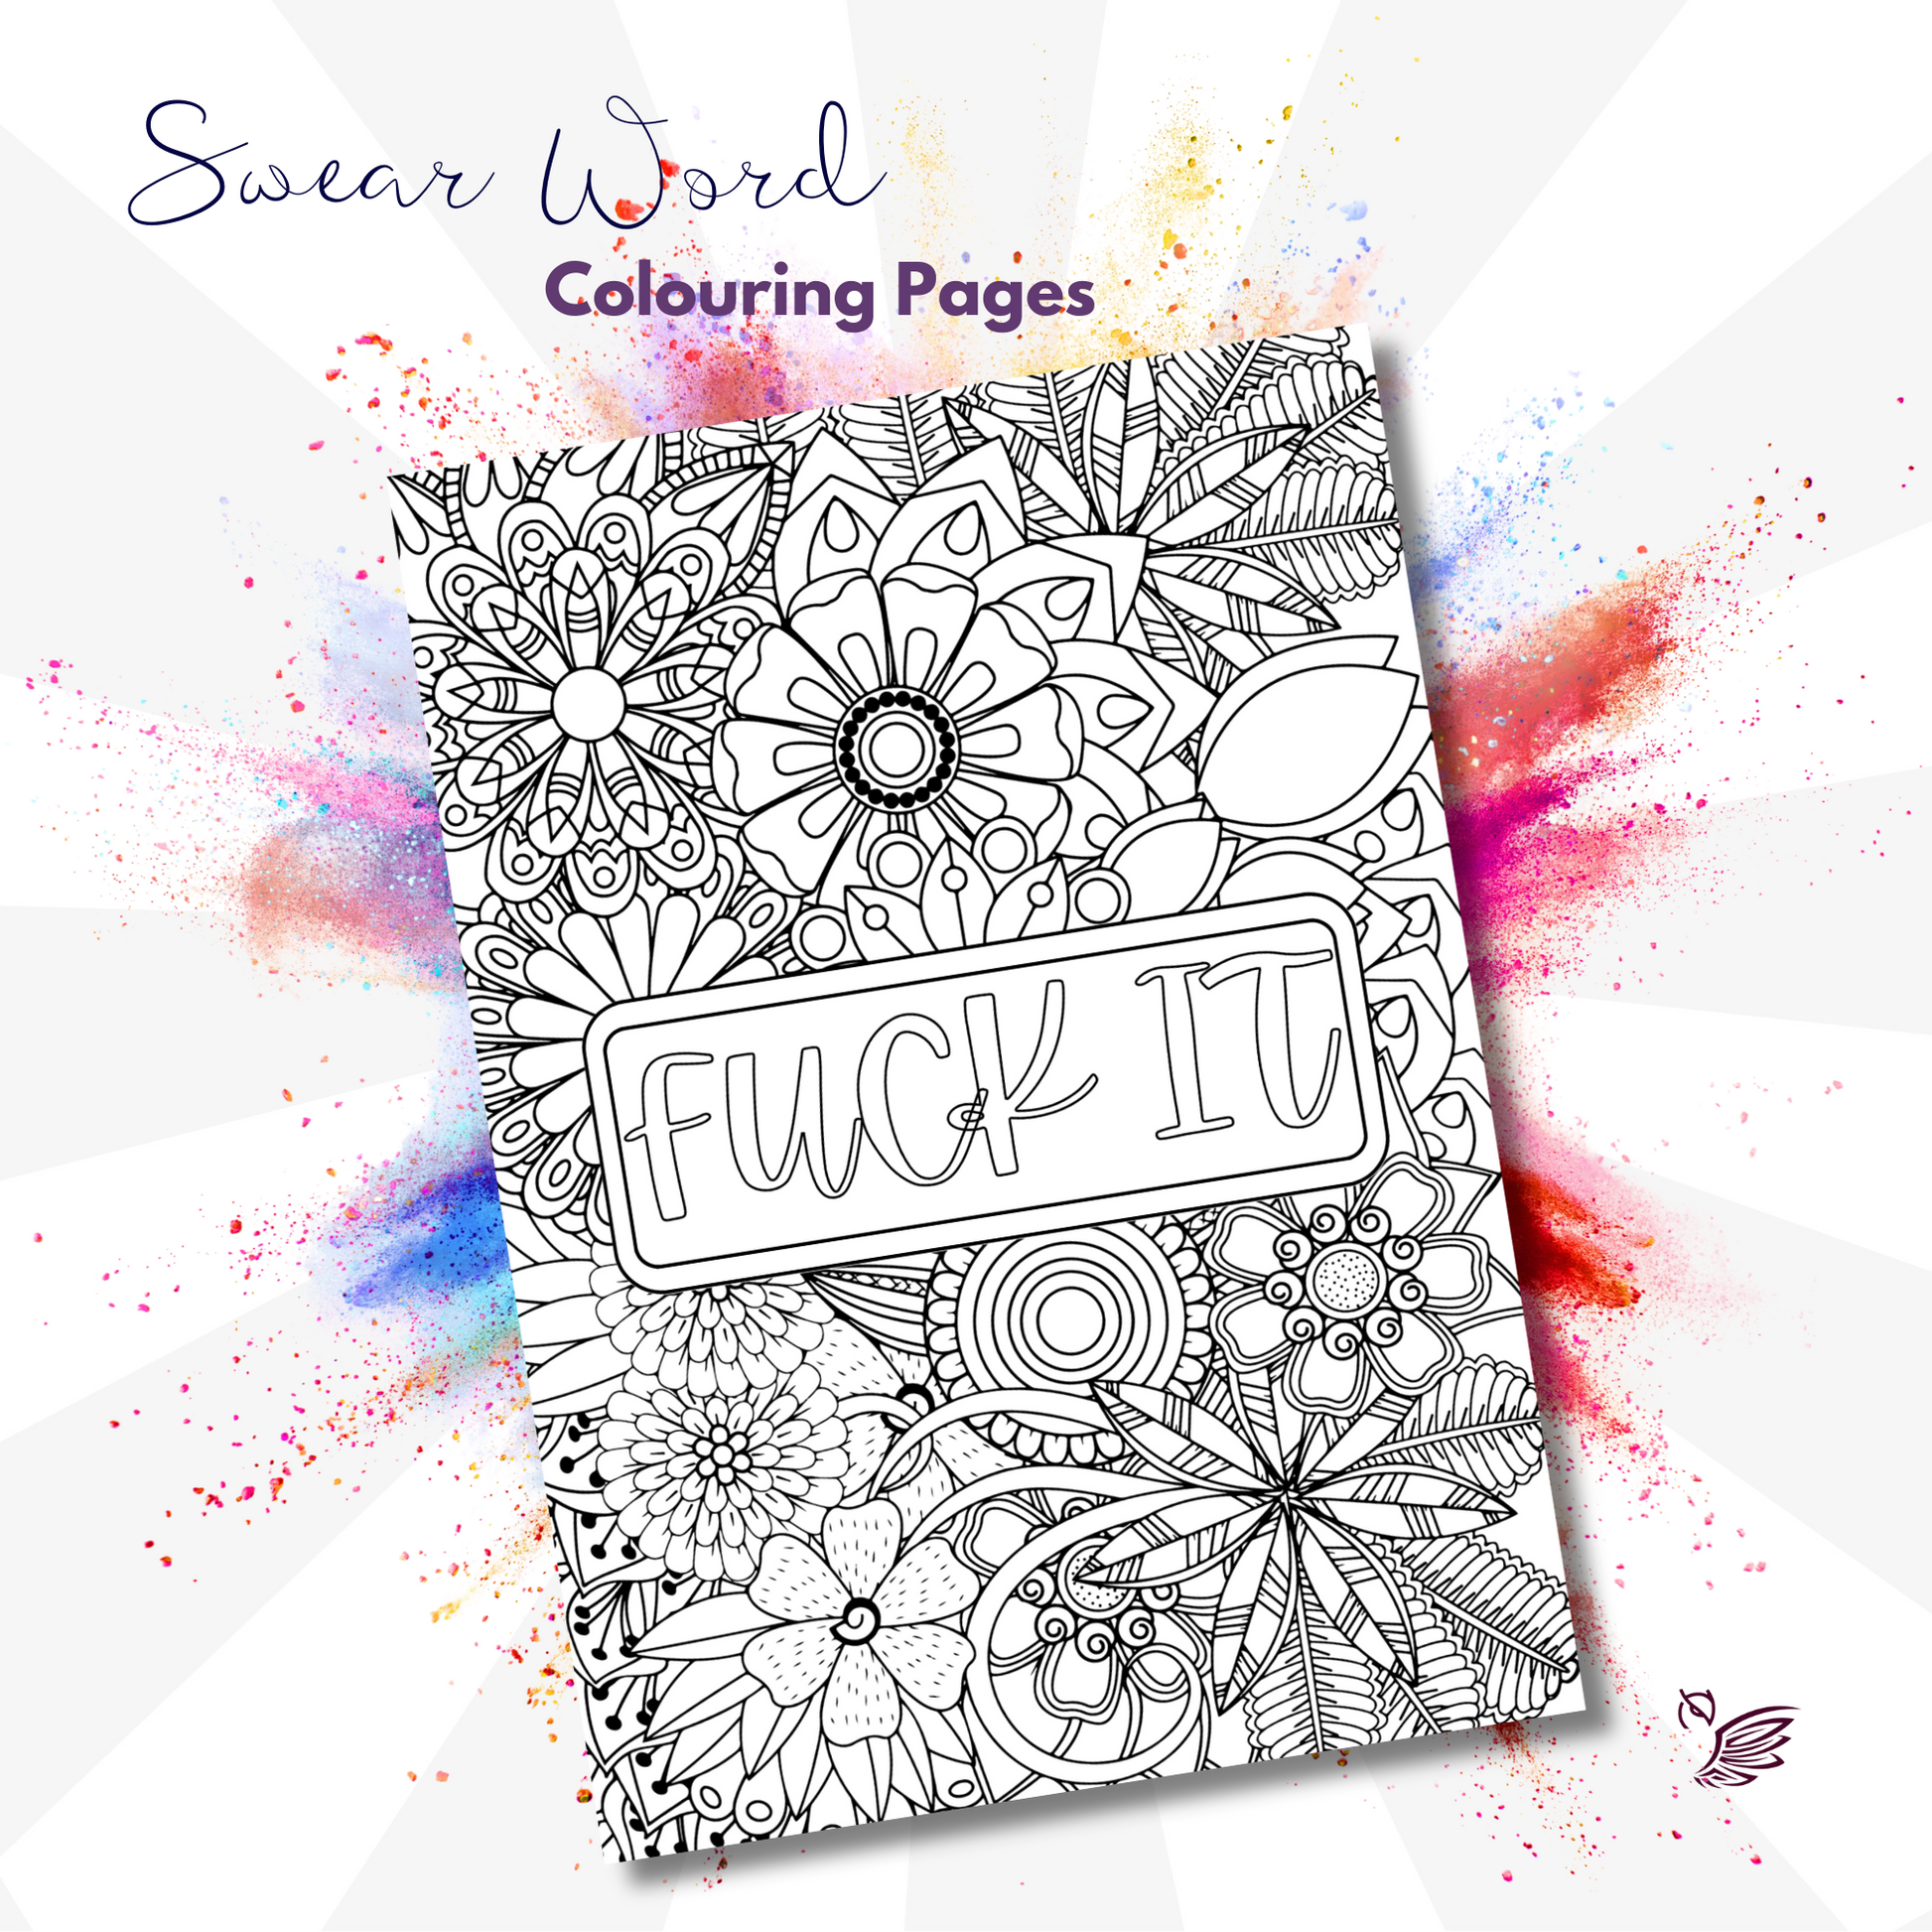 Swear word colouring book pages for adults pdf swearing inappropriate gifts â owl really